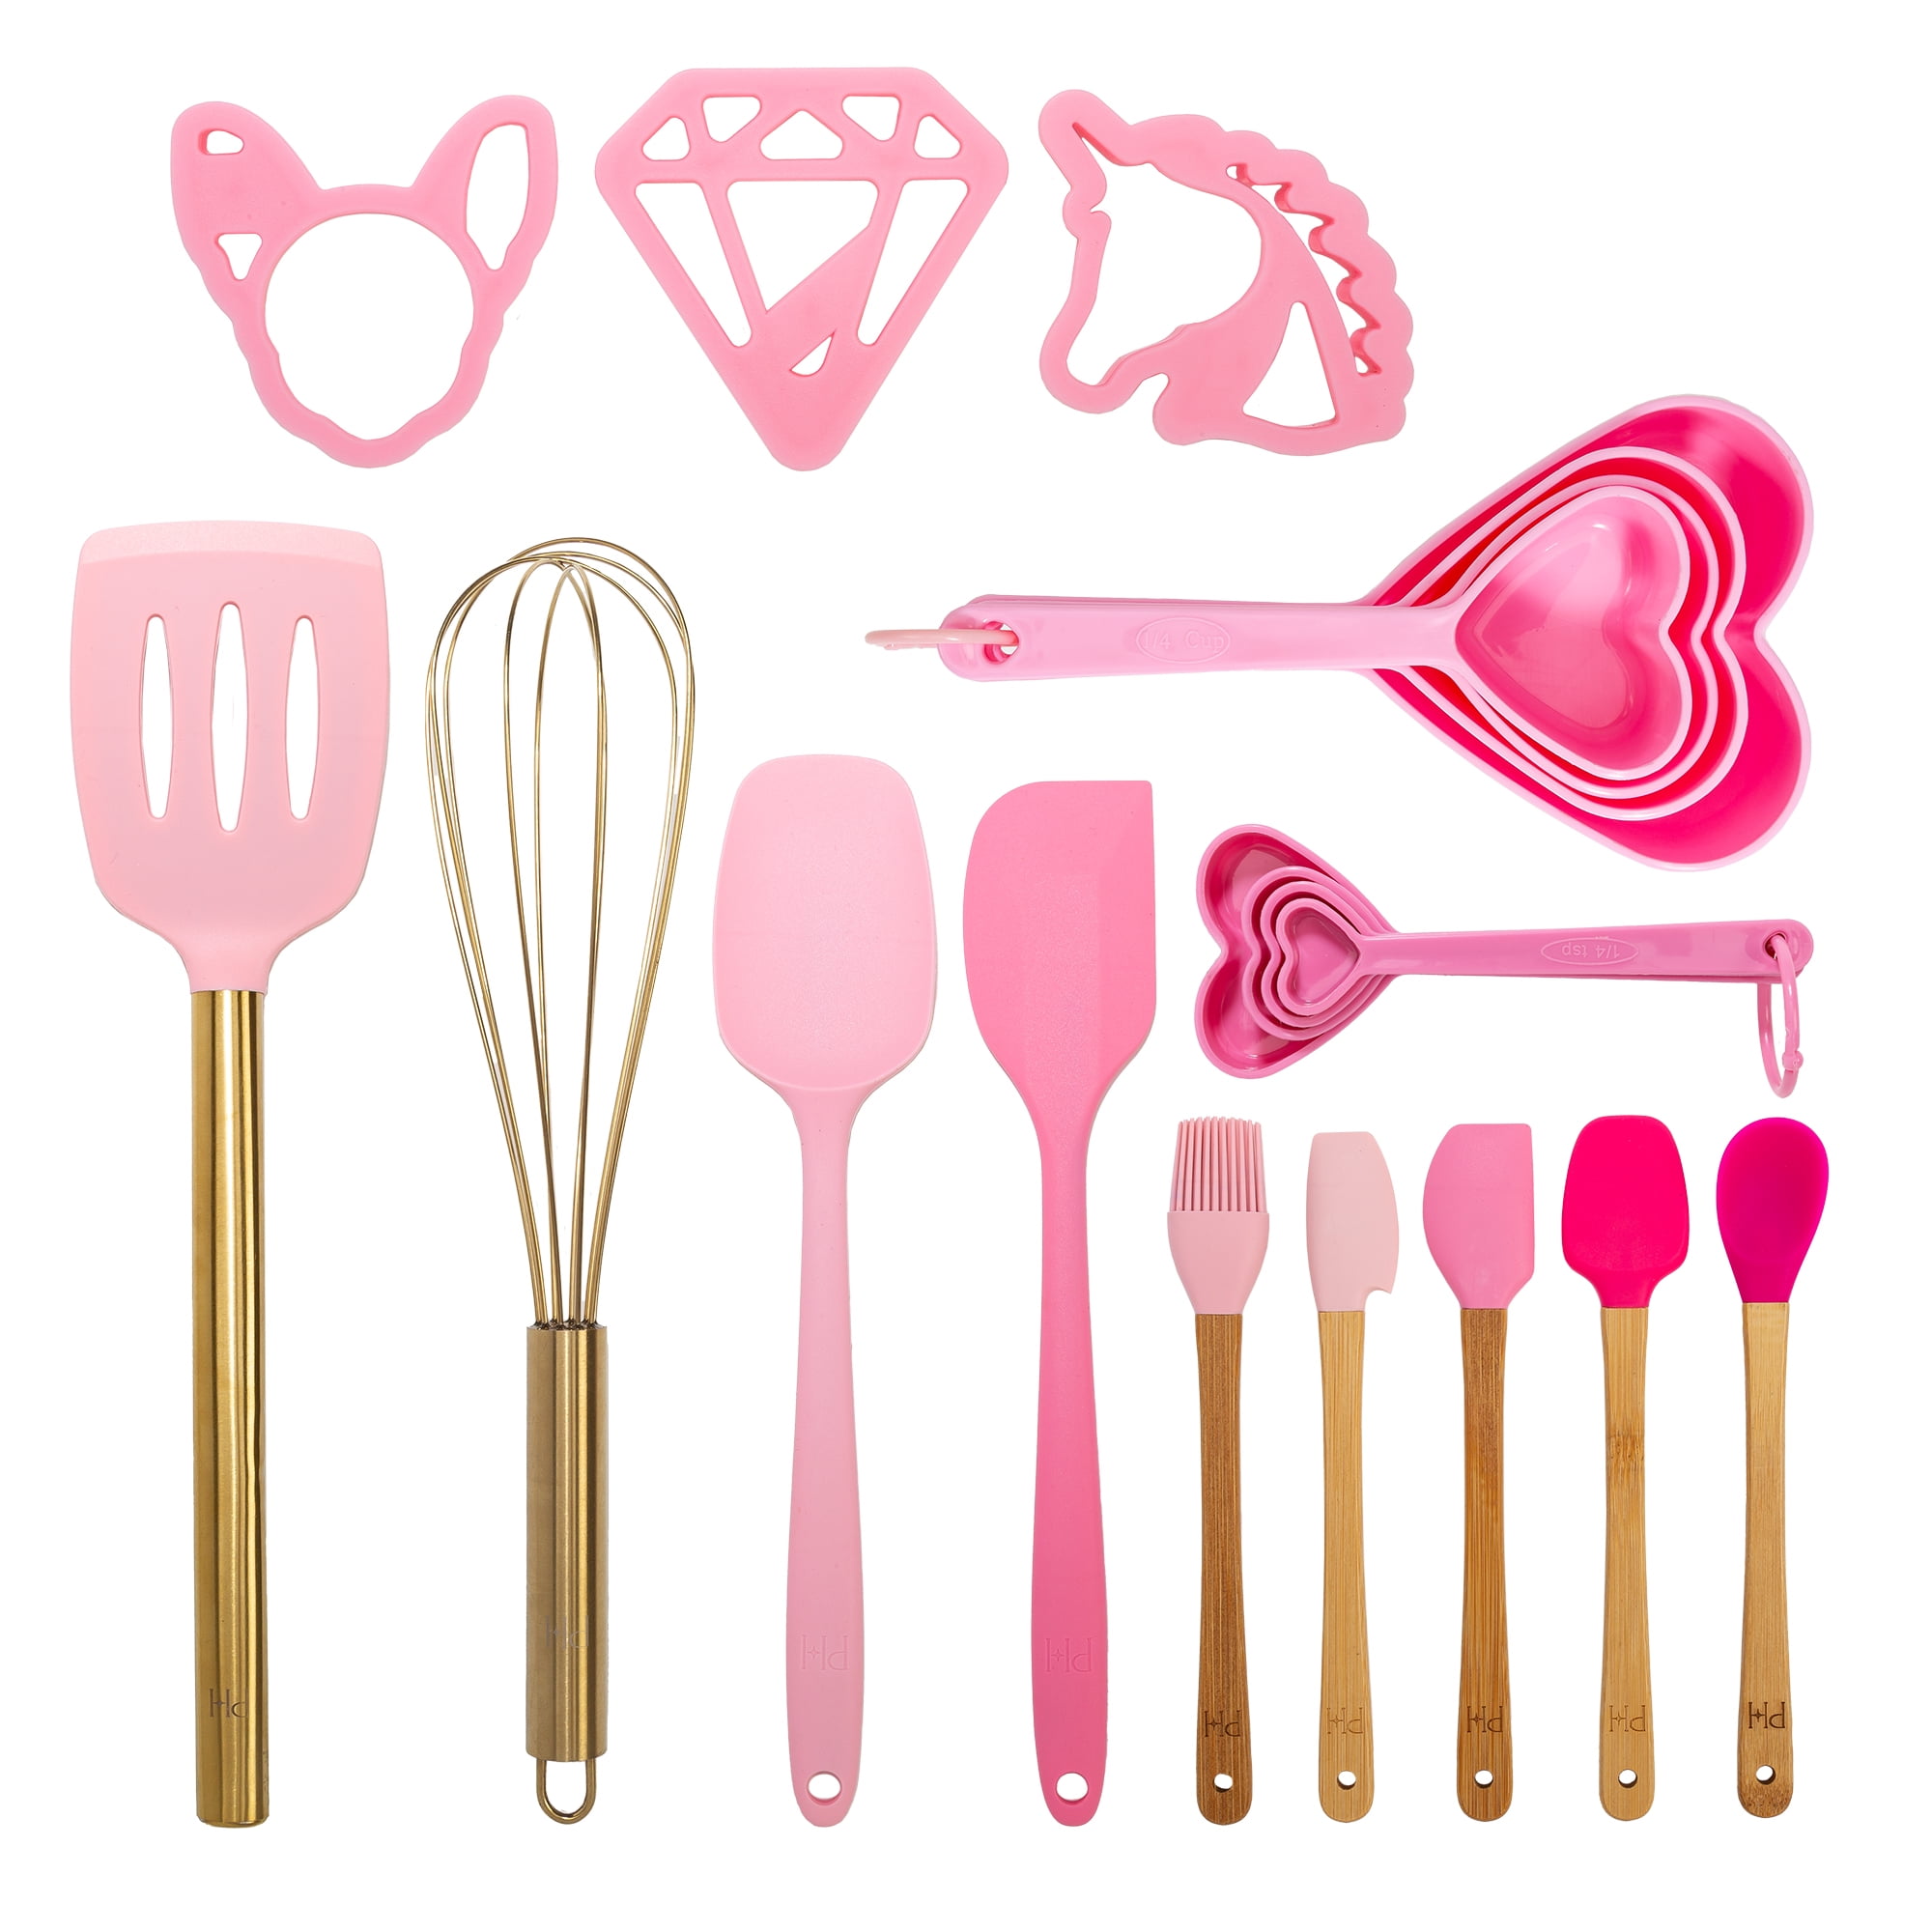 Paris Hilton 7-Piece Cooking Utensils Set, Silicone and Stainless Steel, Pink, Gold